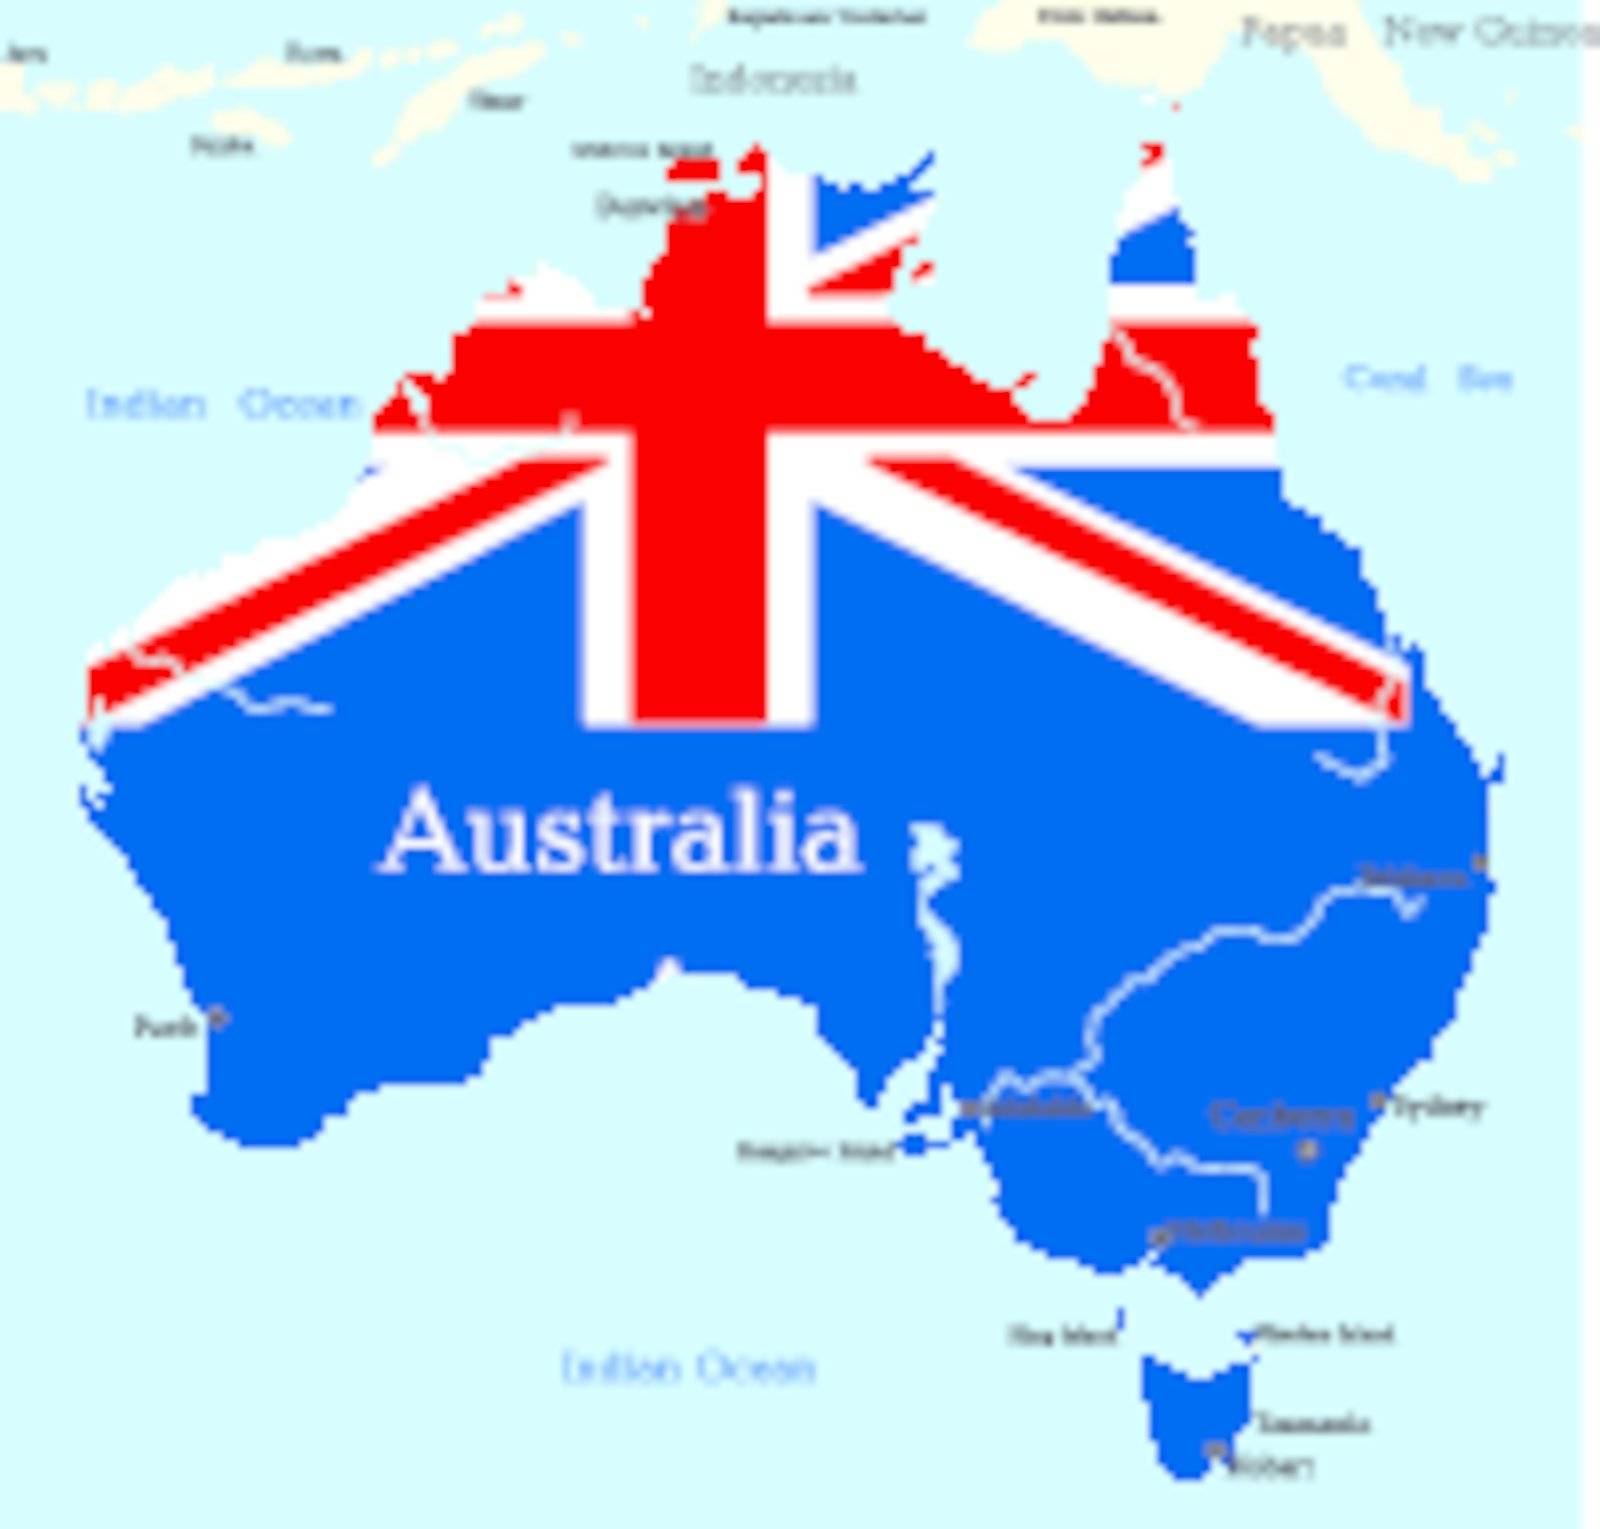 Abstract map of australian continent colored by  national flag